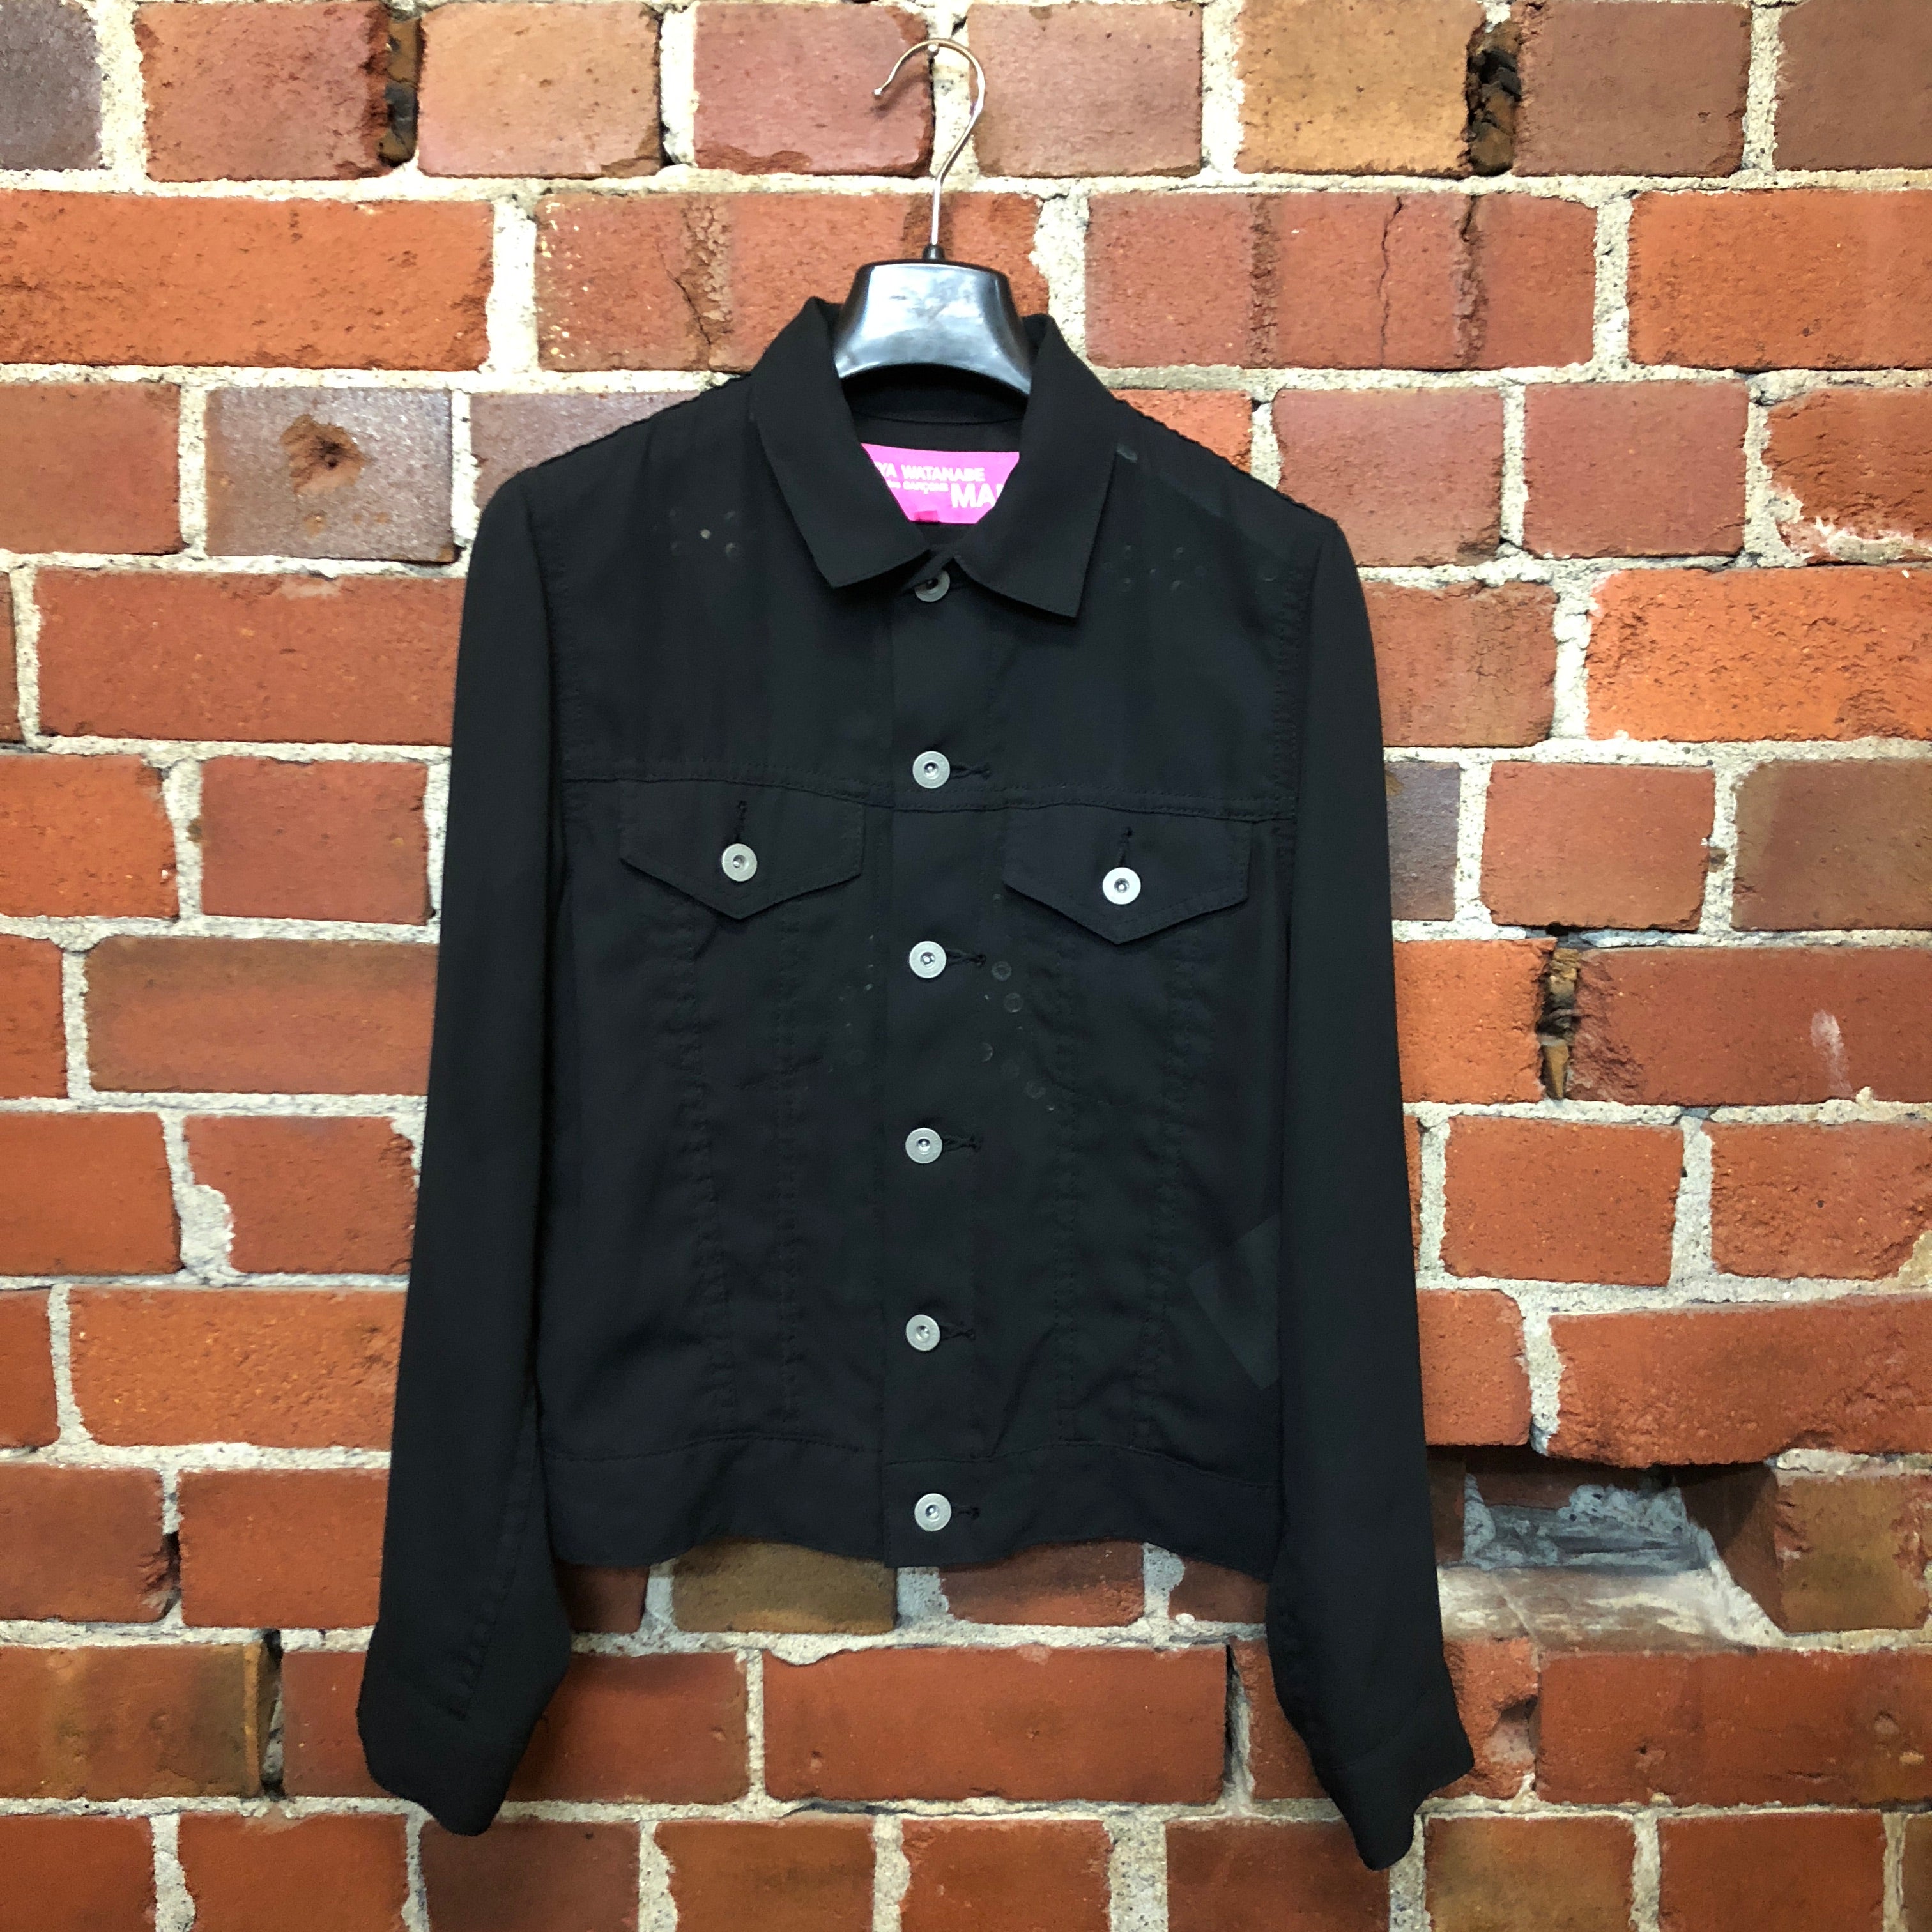 JUNYA WATANABE X COMME DES GARCONS 'MAN' collection jacket